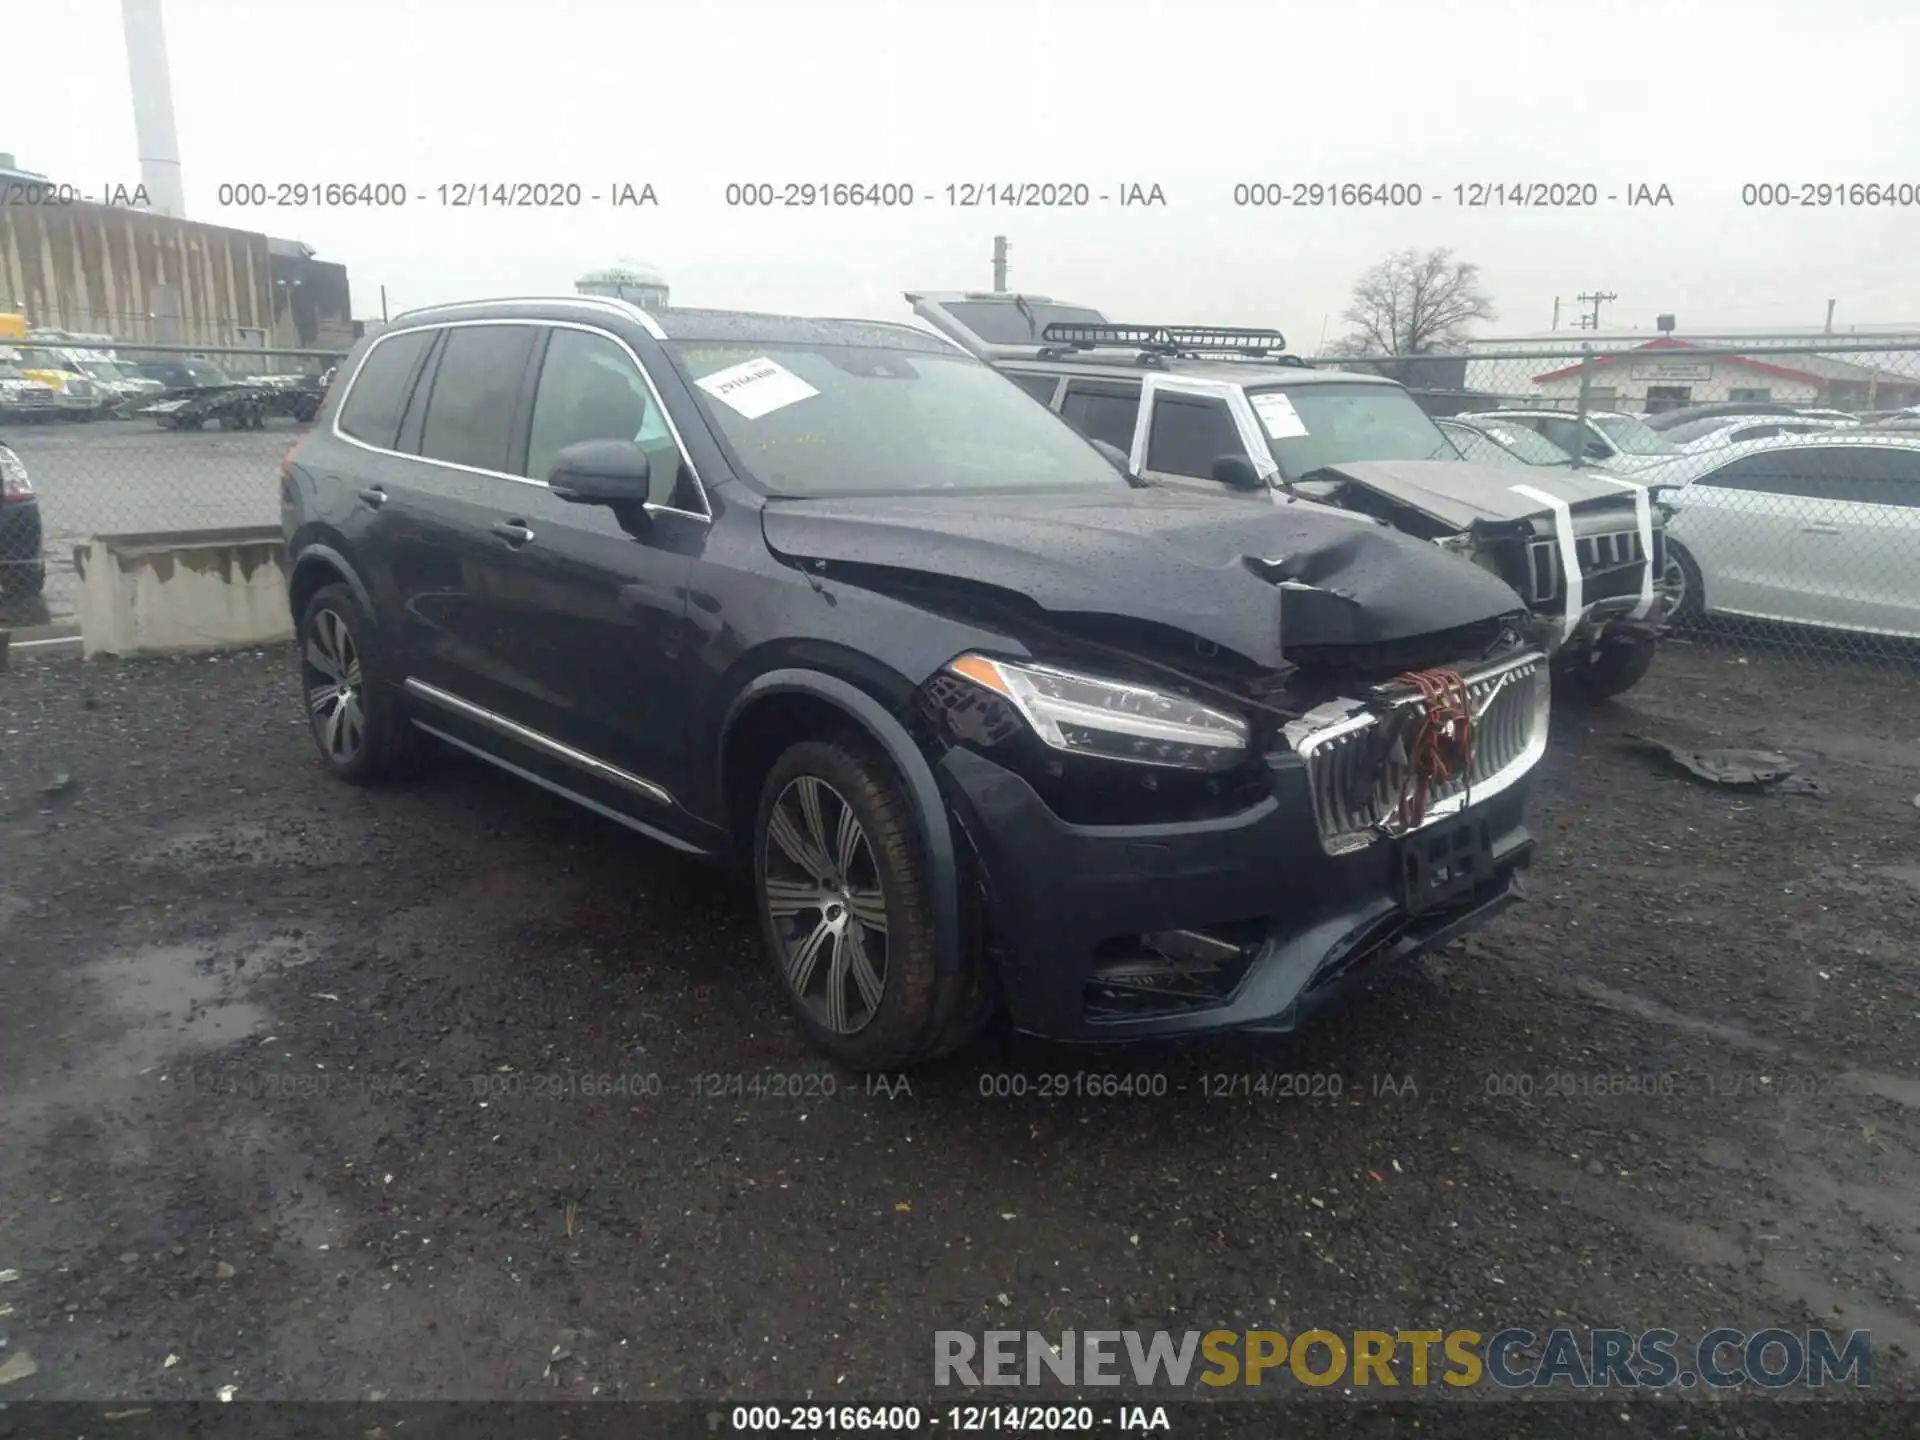 1 Photograph of a damaged car YV4A22PLXL1604144 VOLVO XC90 2020